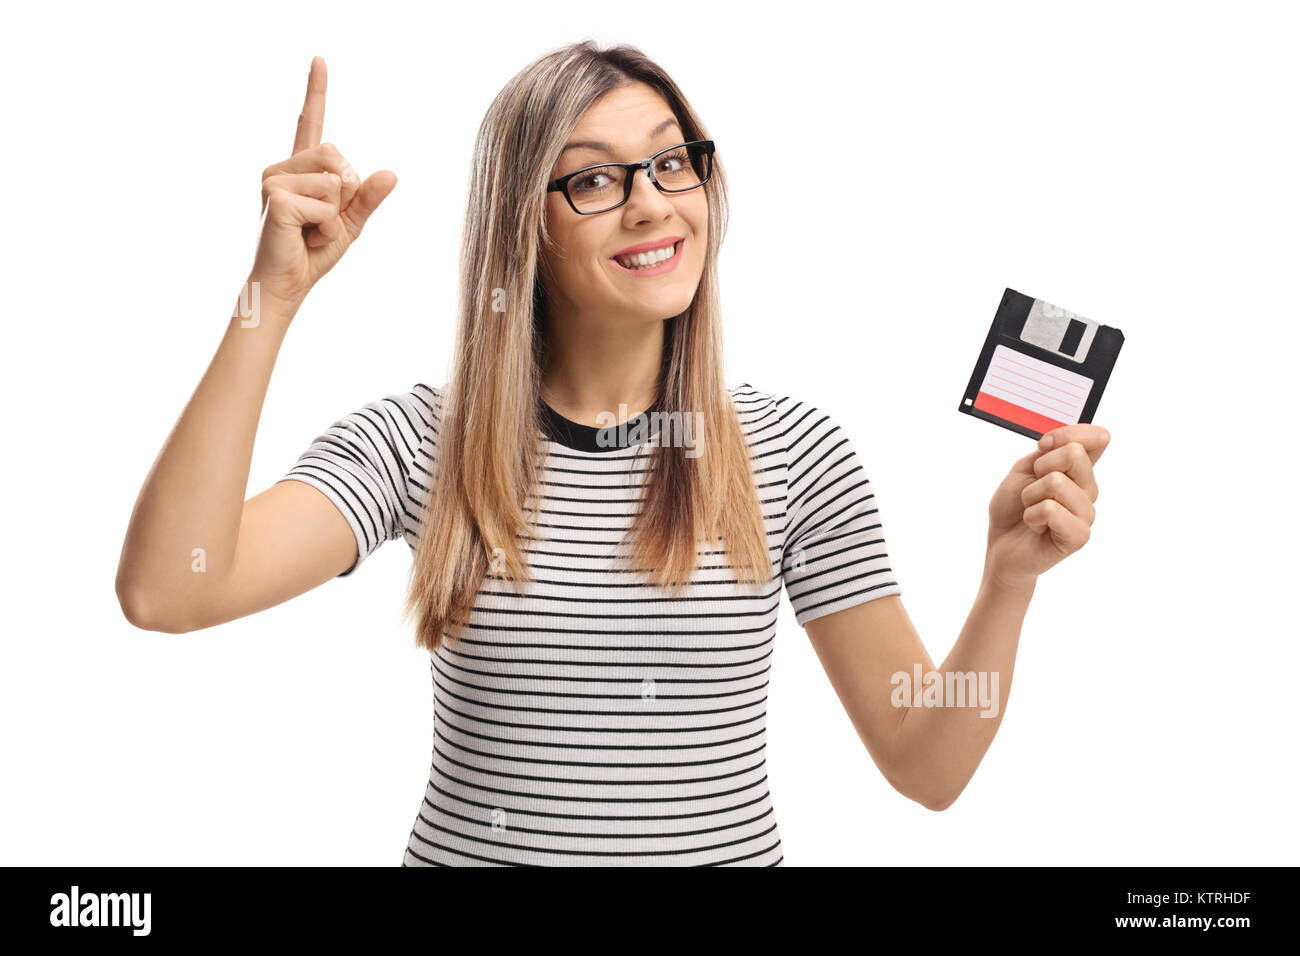 Young woman with a floppy disk holding her index finger up isolated on white background Stock Photo